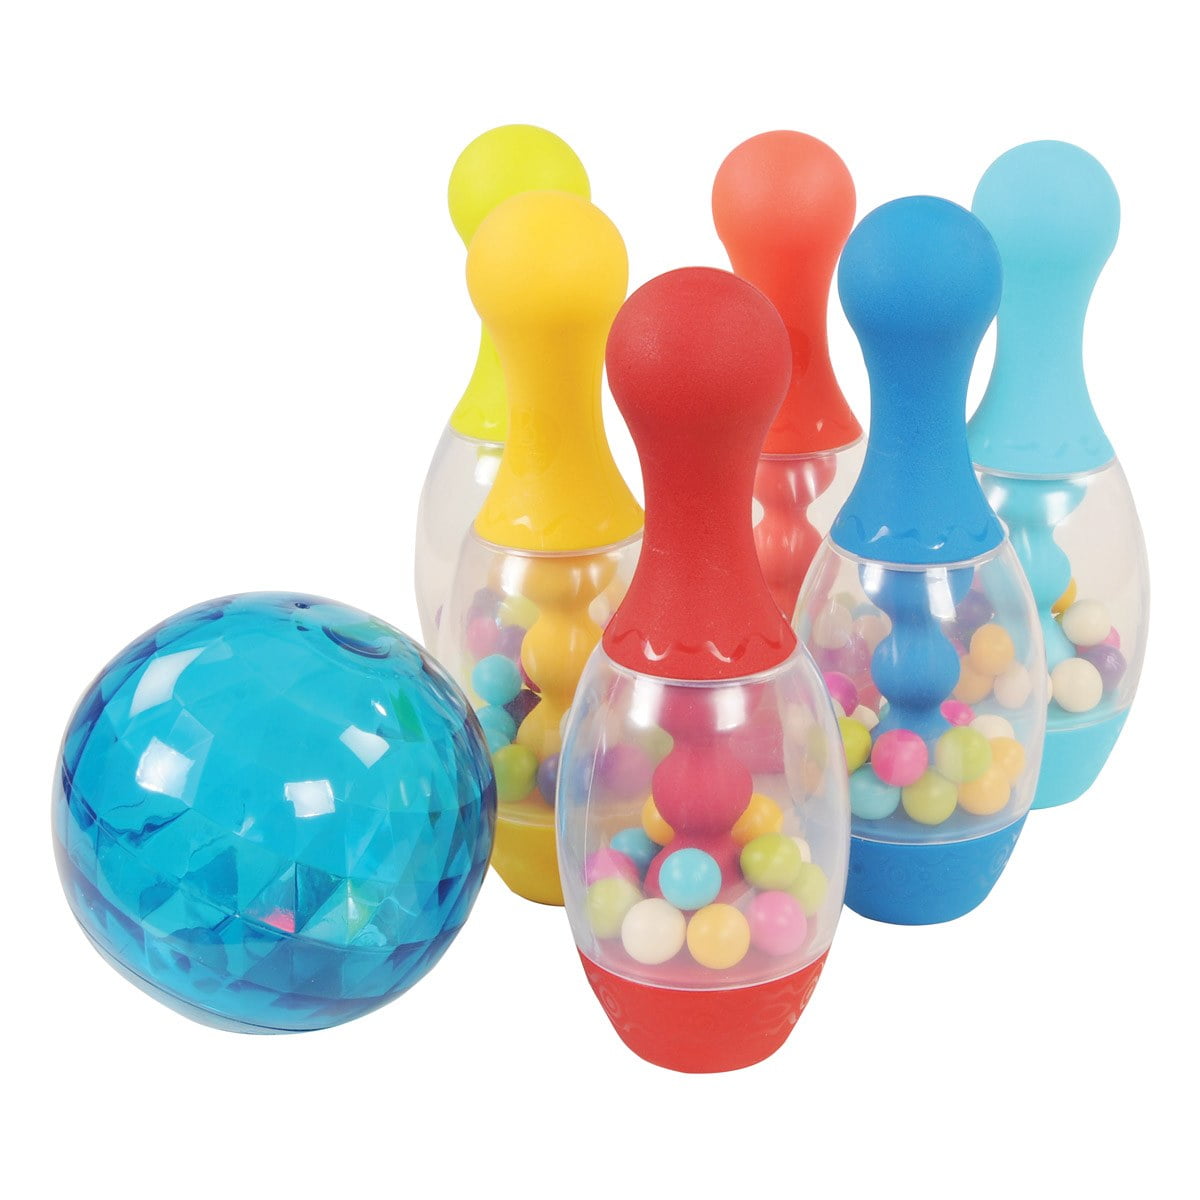 Bowling Ball VT See Through Light Up Childrens Toy Bowling Playset w/ 6 Pins 